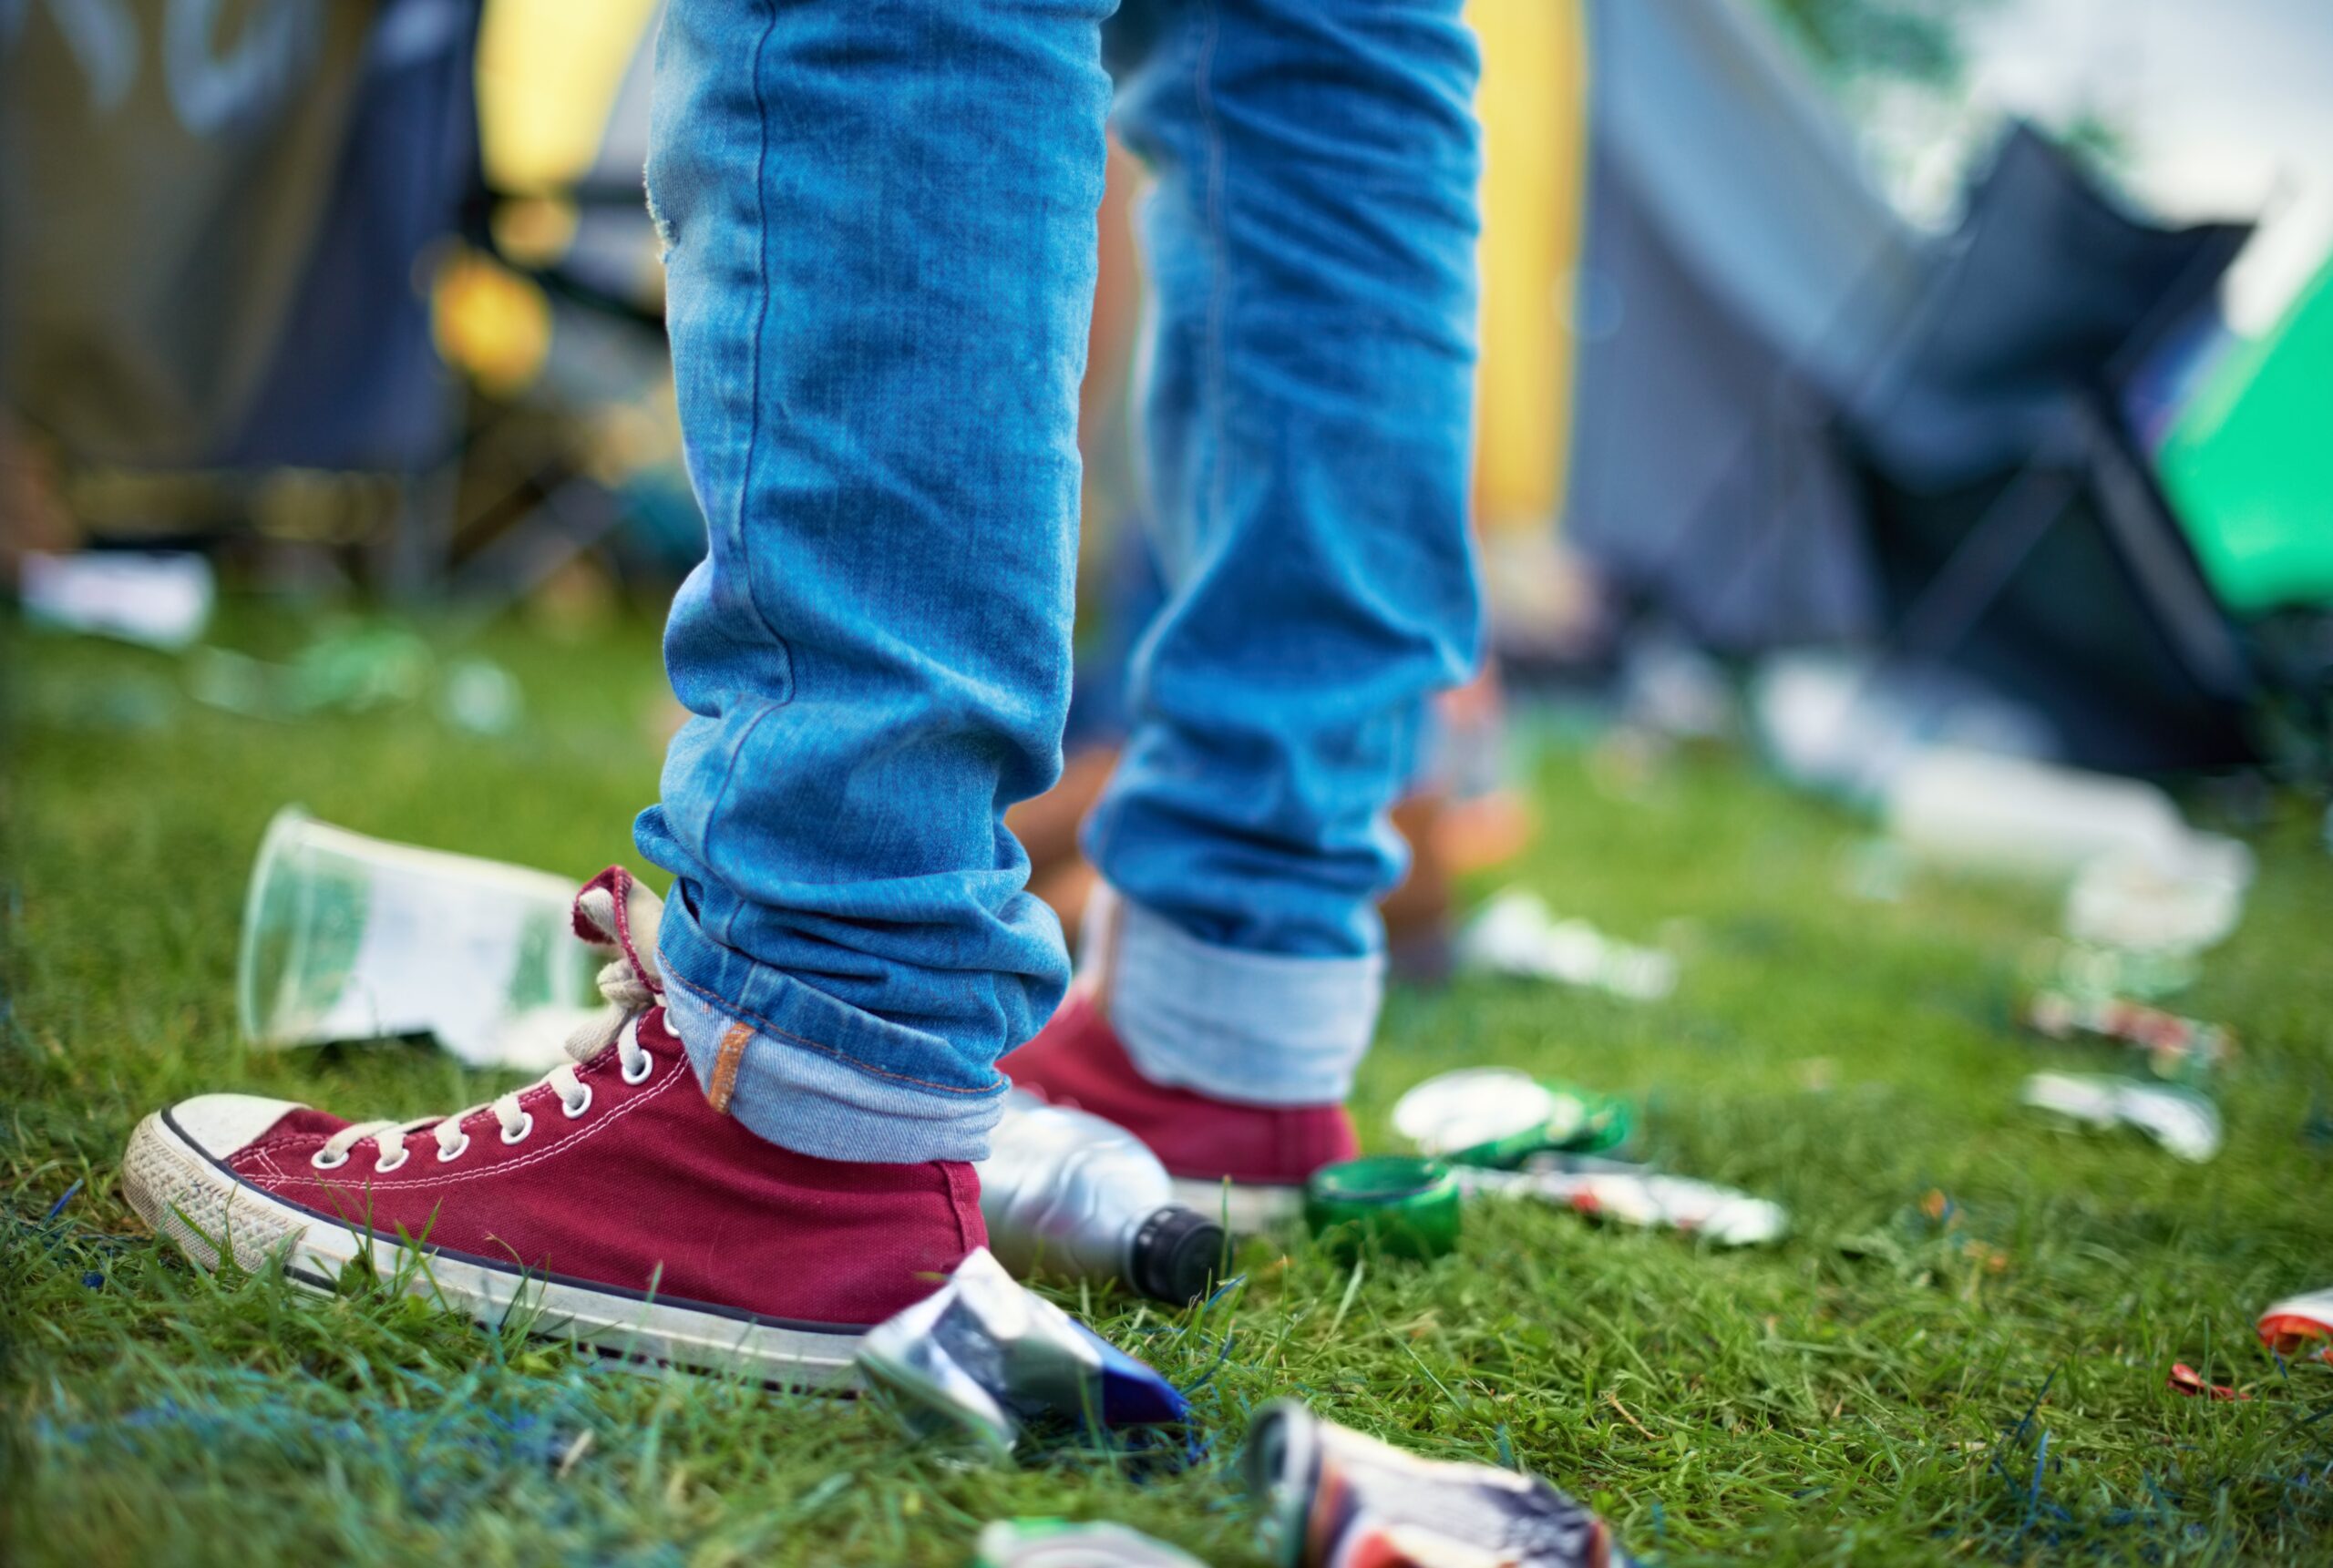 How do you manage waste at an event in nsw?